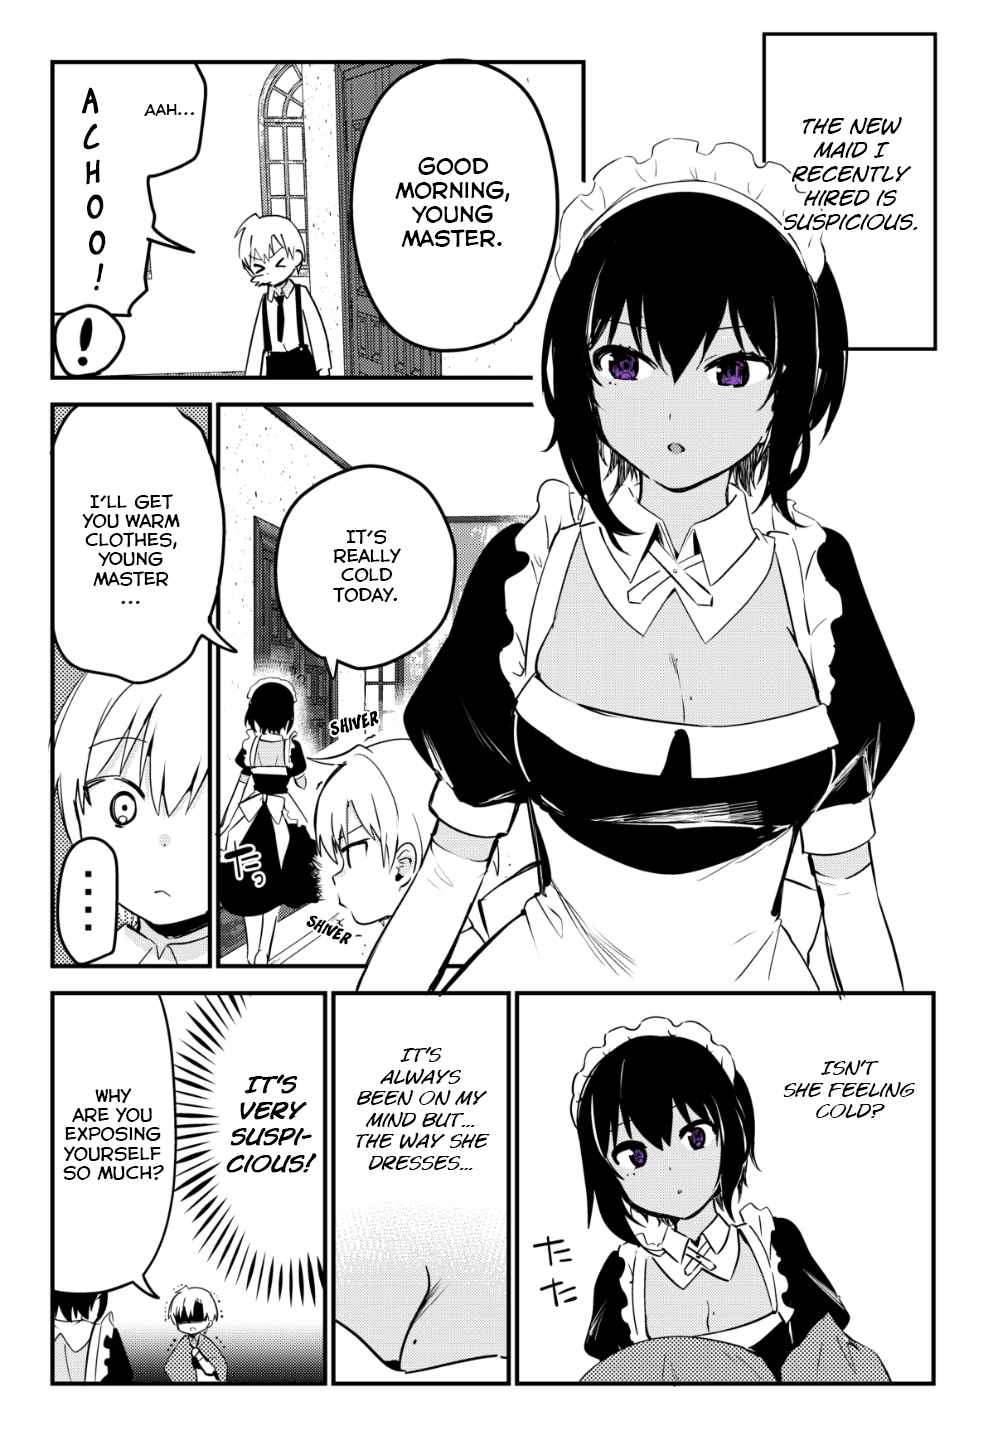 My Recently Hired Maid Is Suspicious (Webcomic) Ch. 6